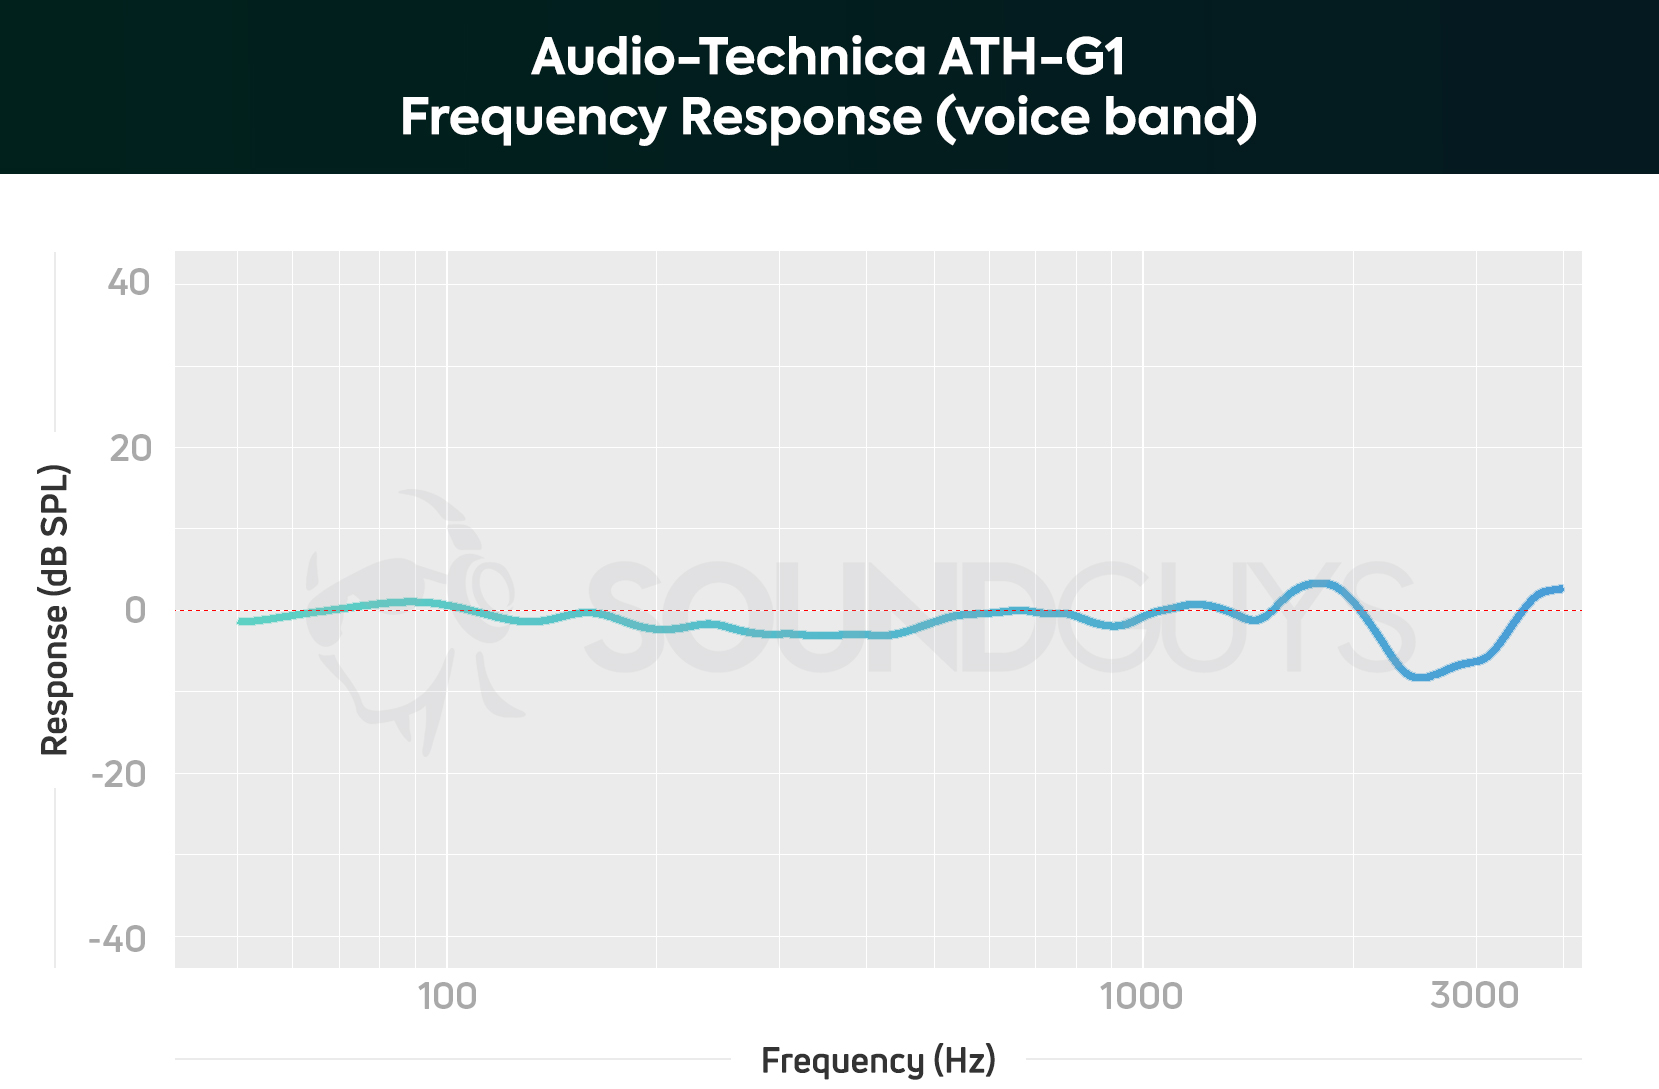 Audio-Technica ATH-G1 frequency response chart for the boom mic, limited to the human voice band.